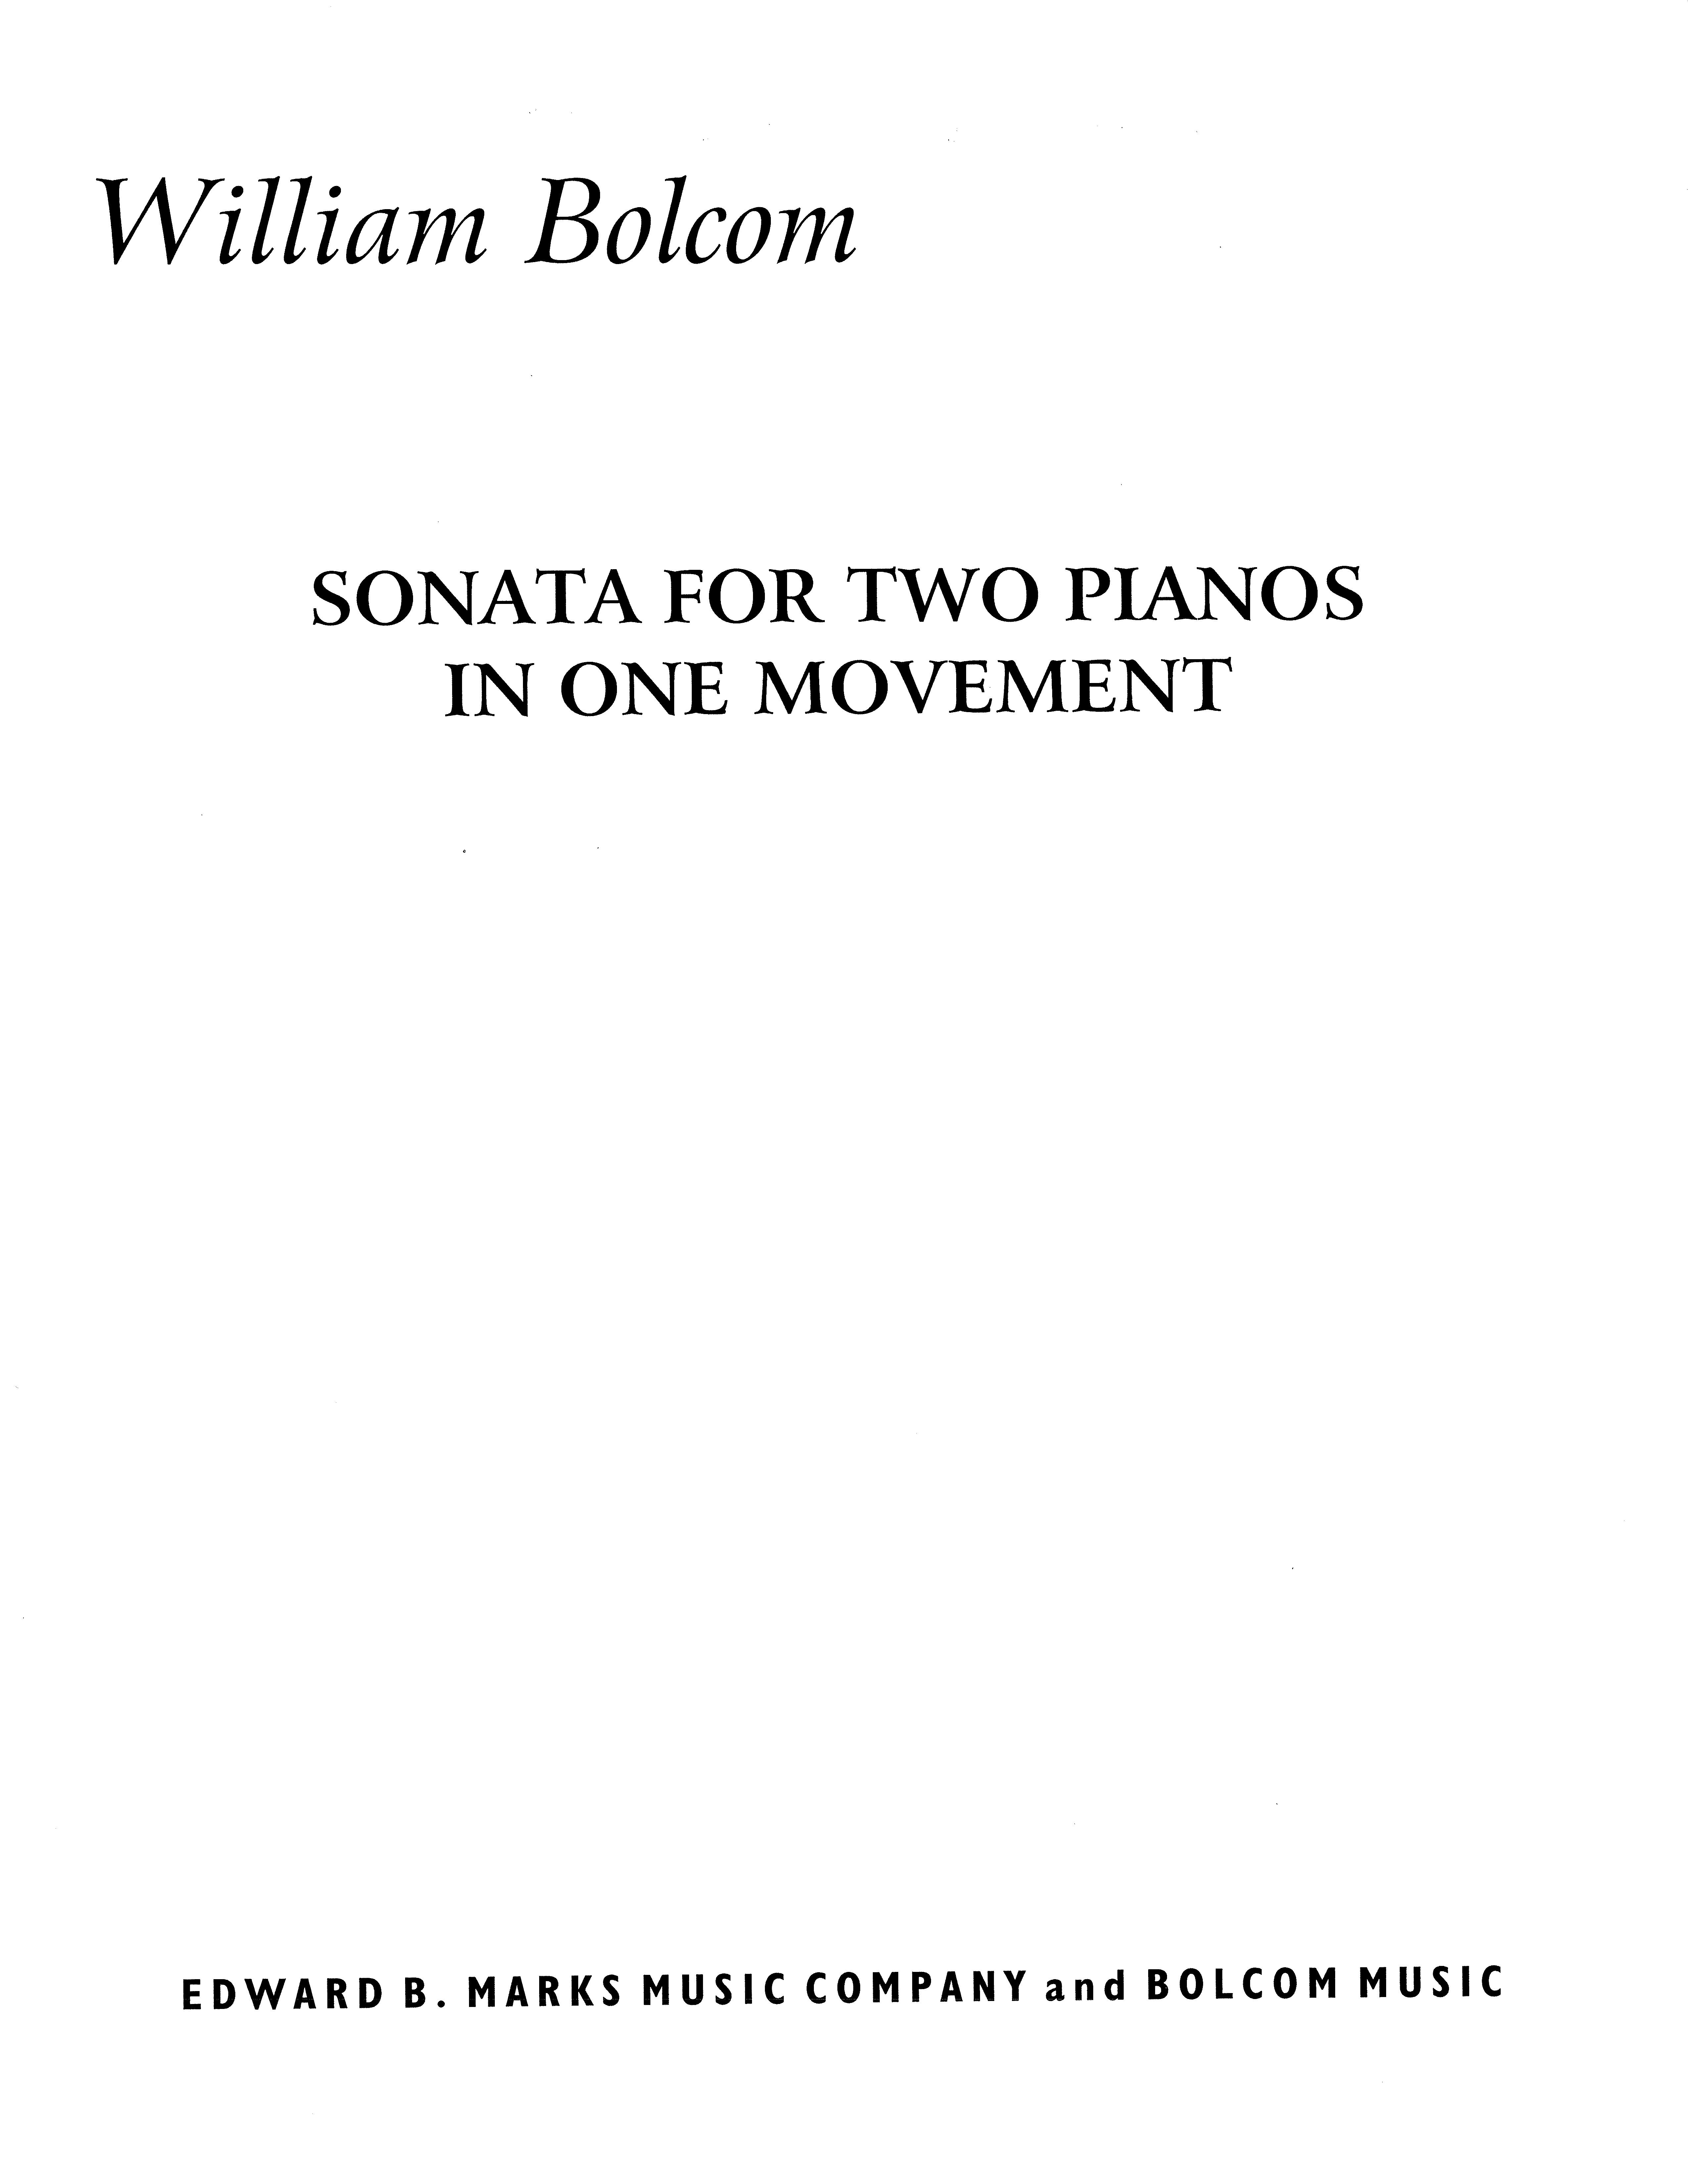 Sonata for Two Pianos for Piano duet